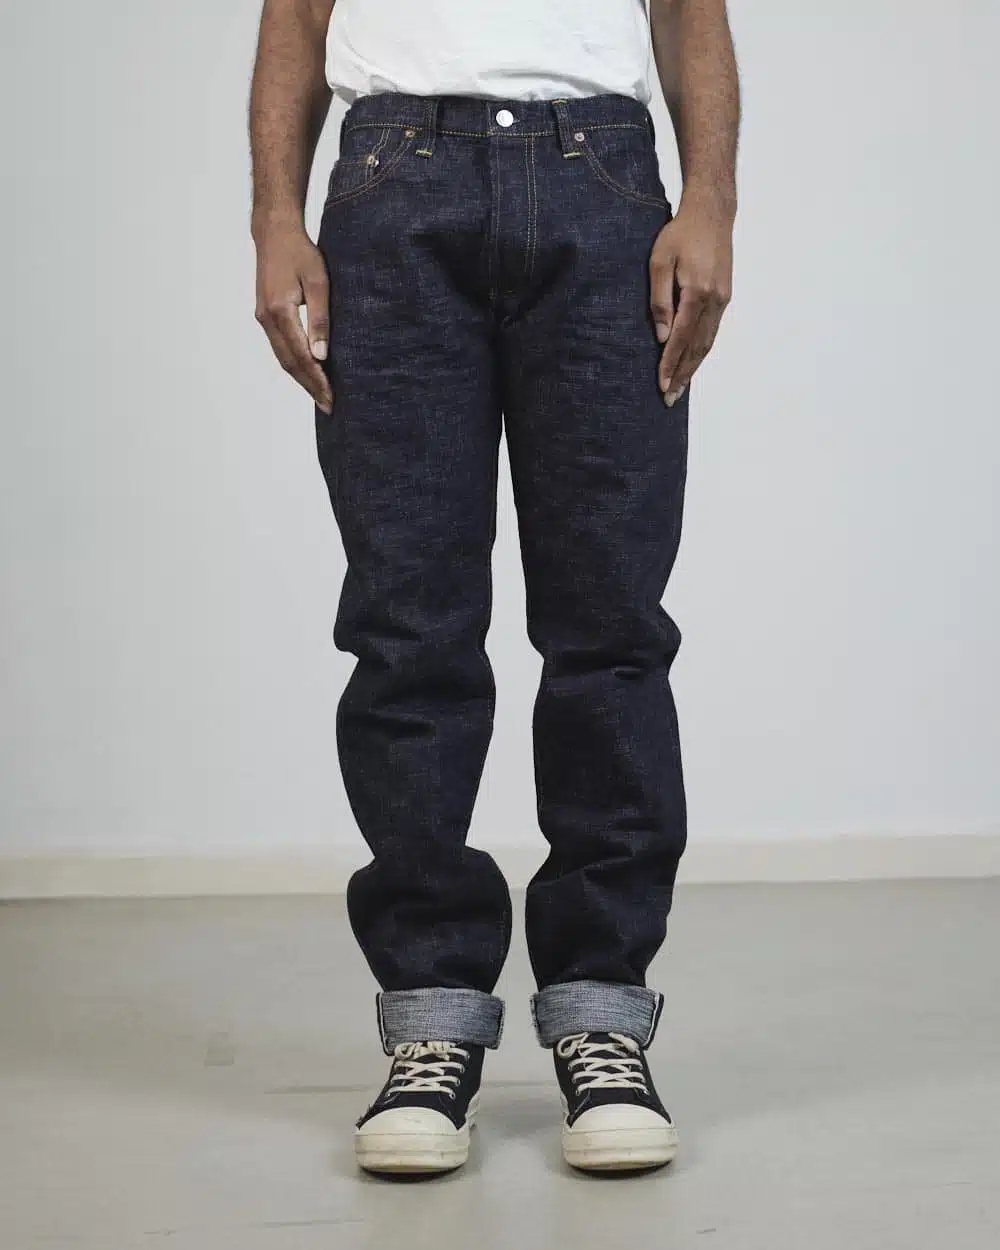 The Strike Gold SG7104 17oz Tapered Jeans